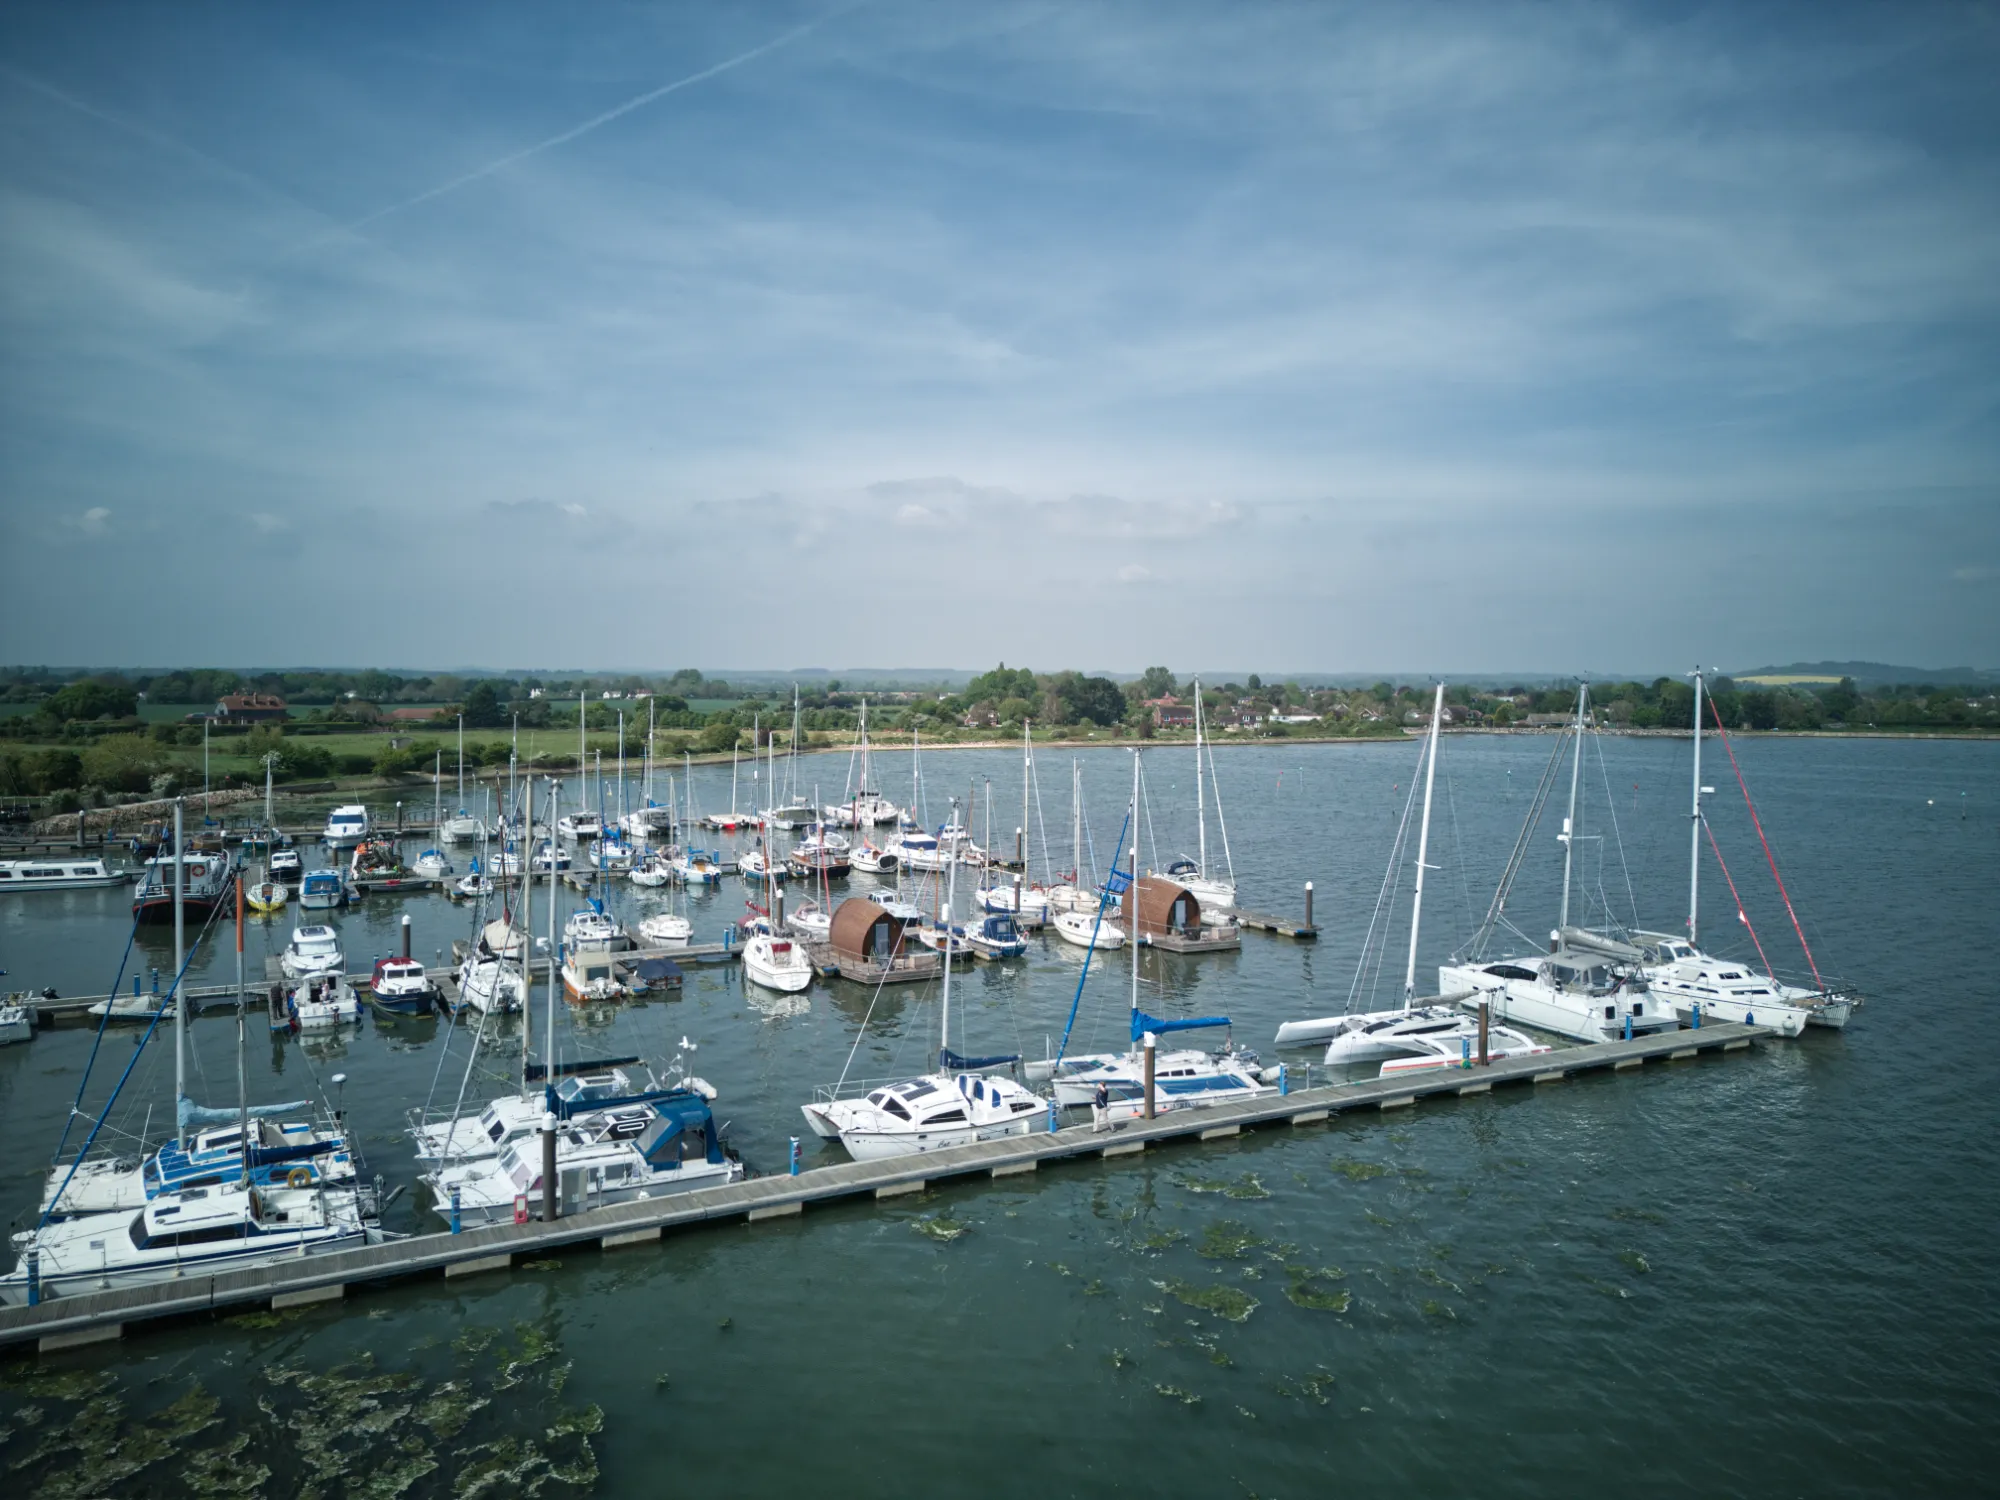 Chichester Harbour is is a stunning natural harbour with so many areas to explore on paddleboard, windsurfer or wing.